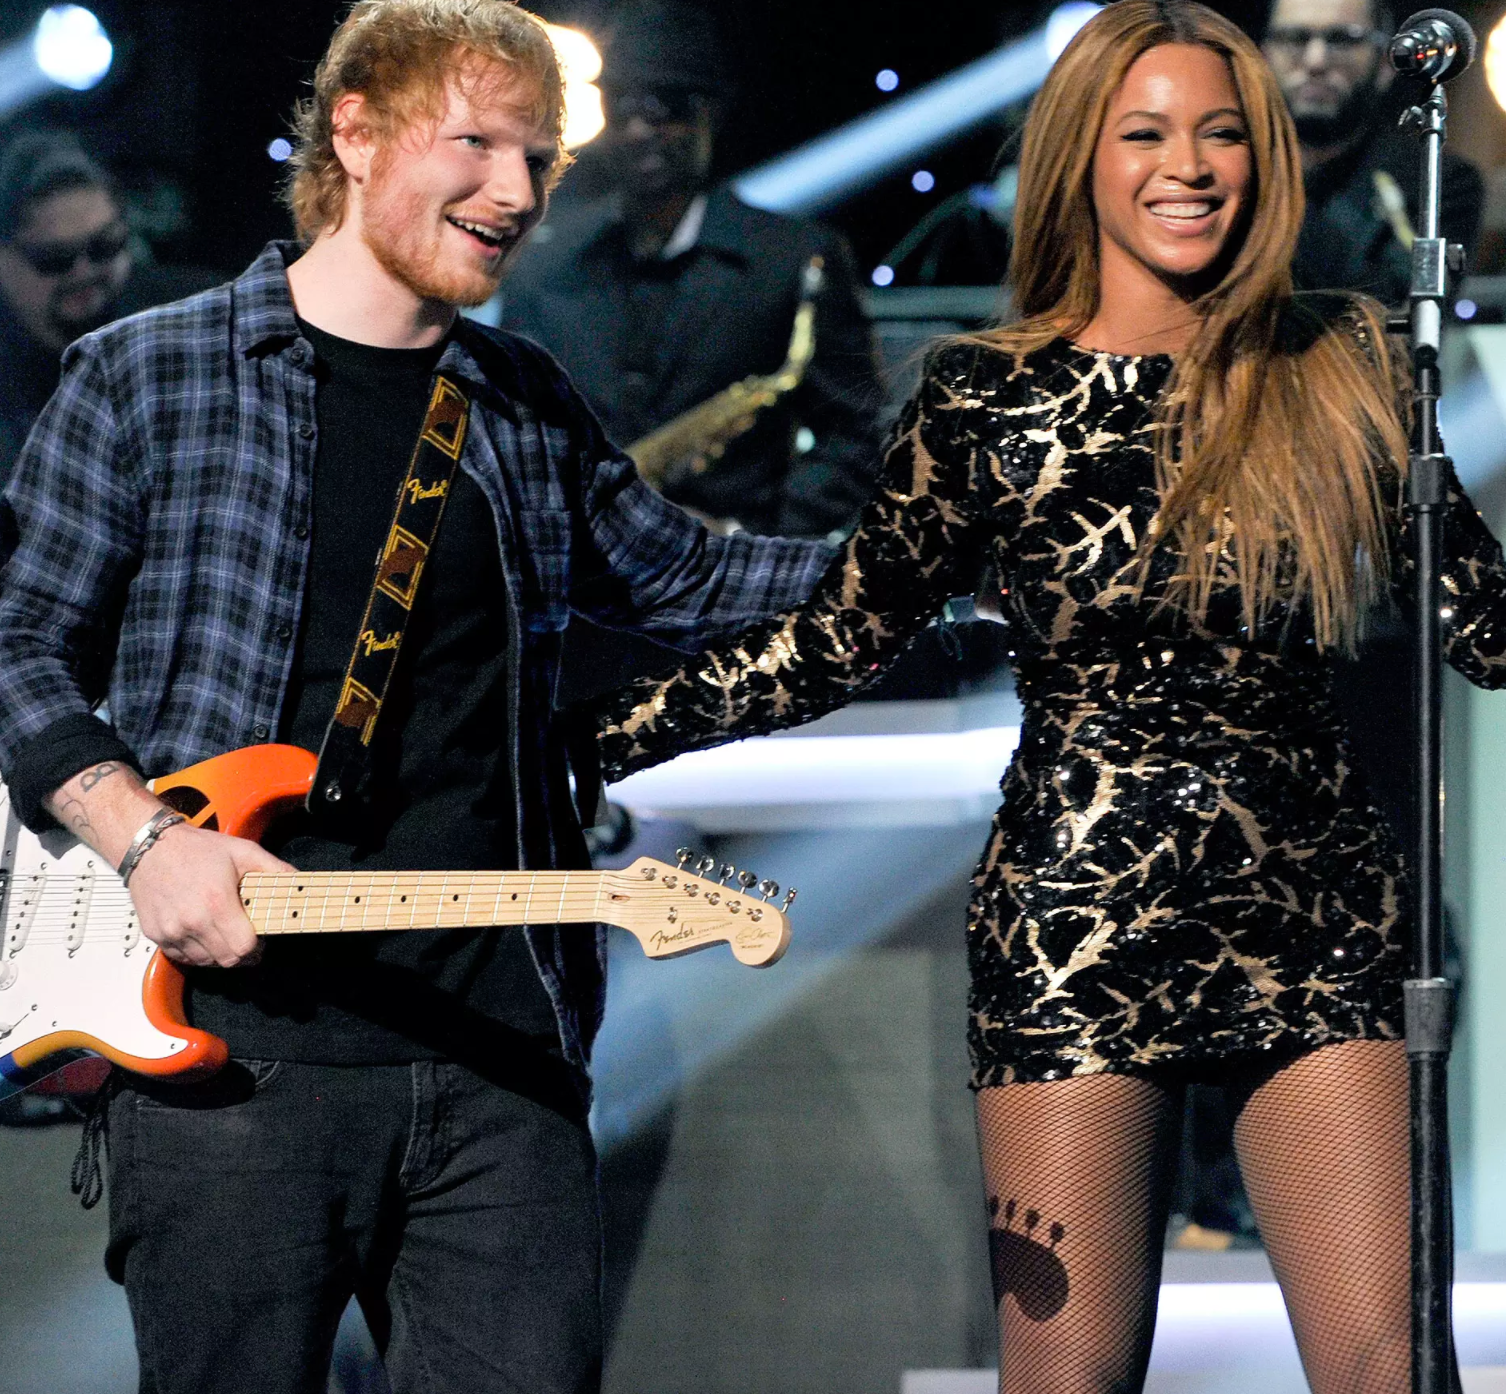 Beyoncé Changes Her Email Address Weekly, Her 'Perfect' Duet Partner Ed Sheeran Reveals